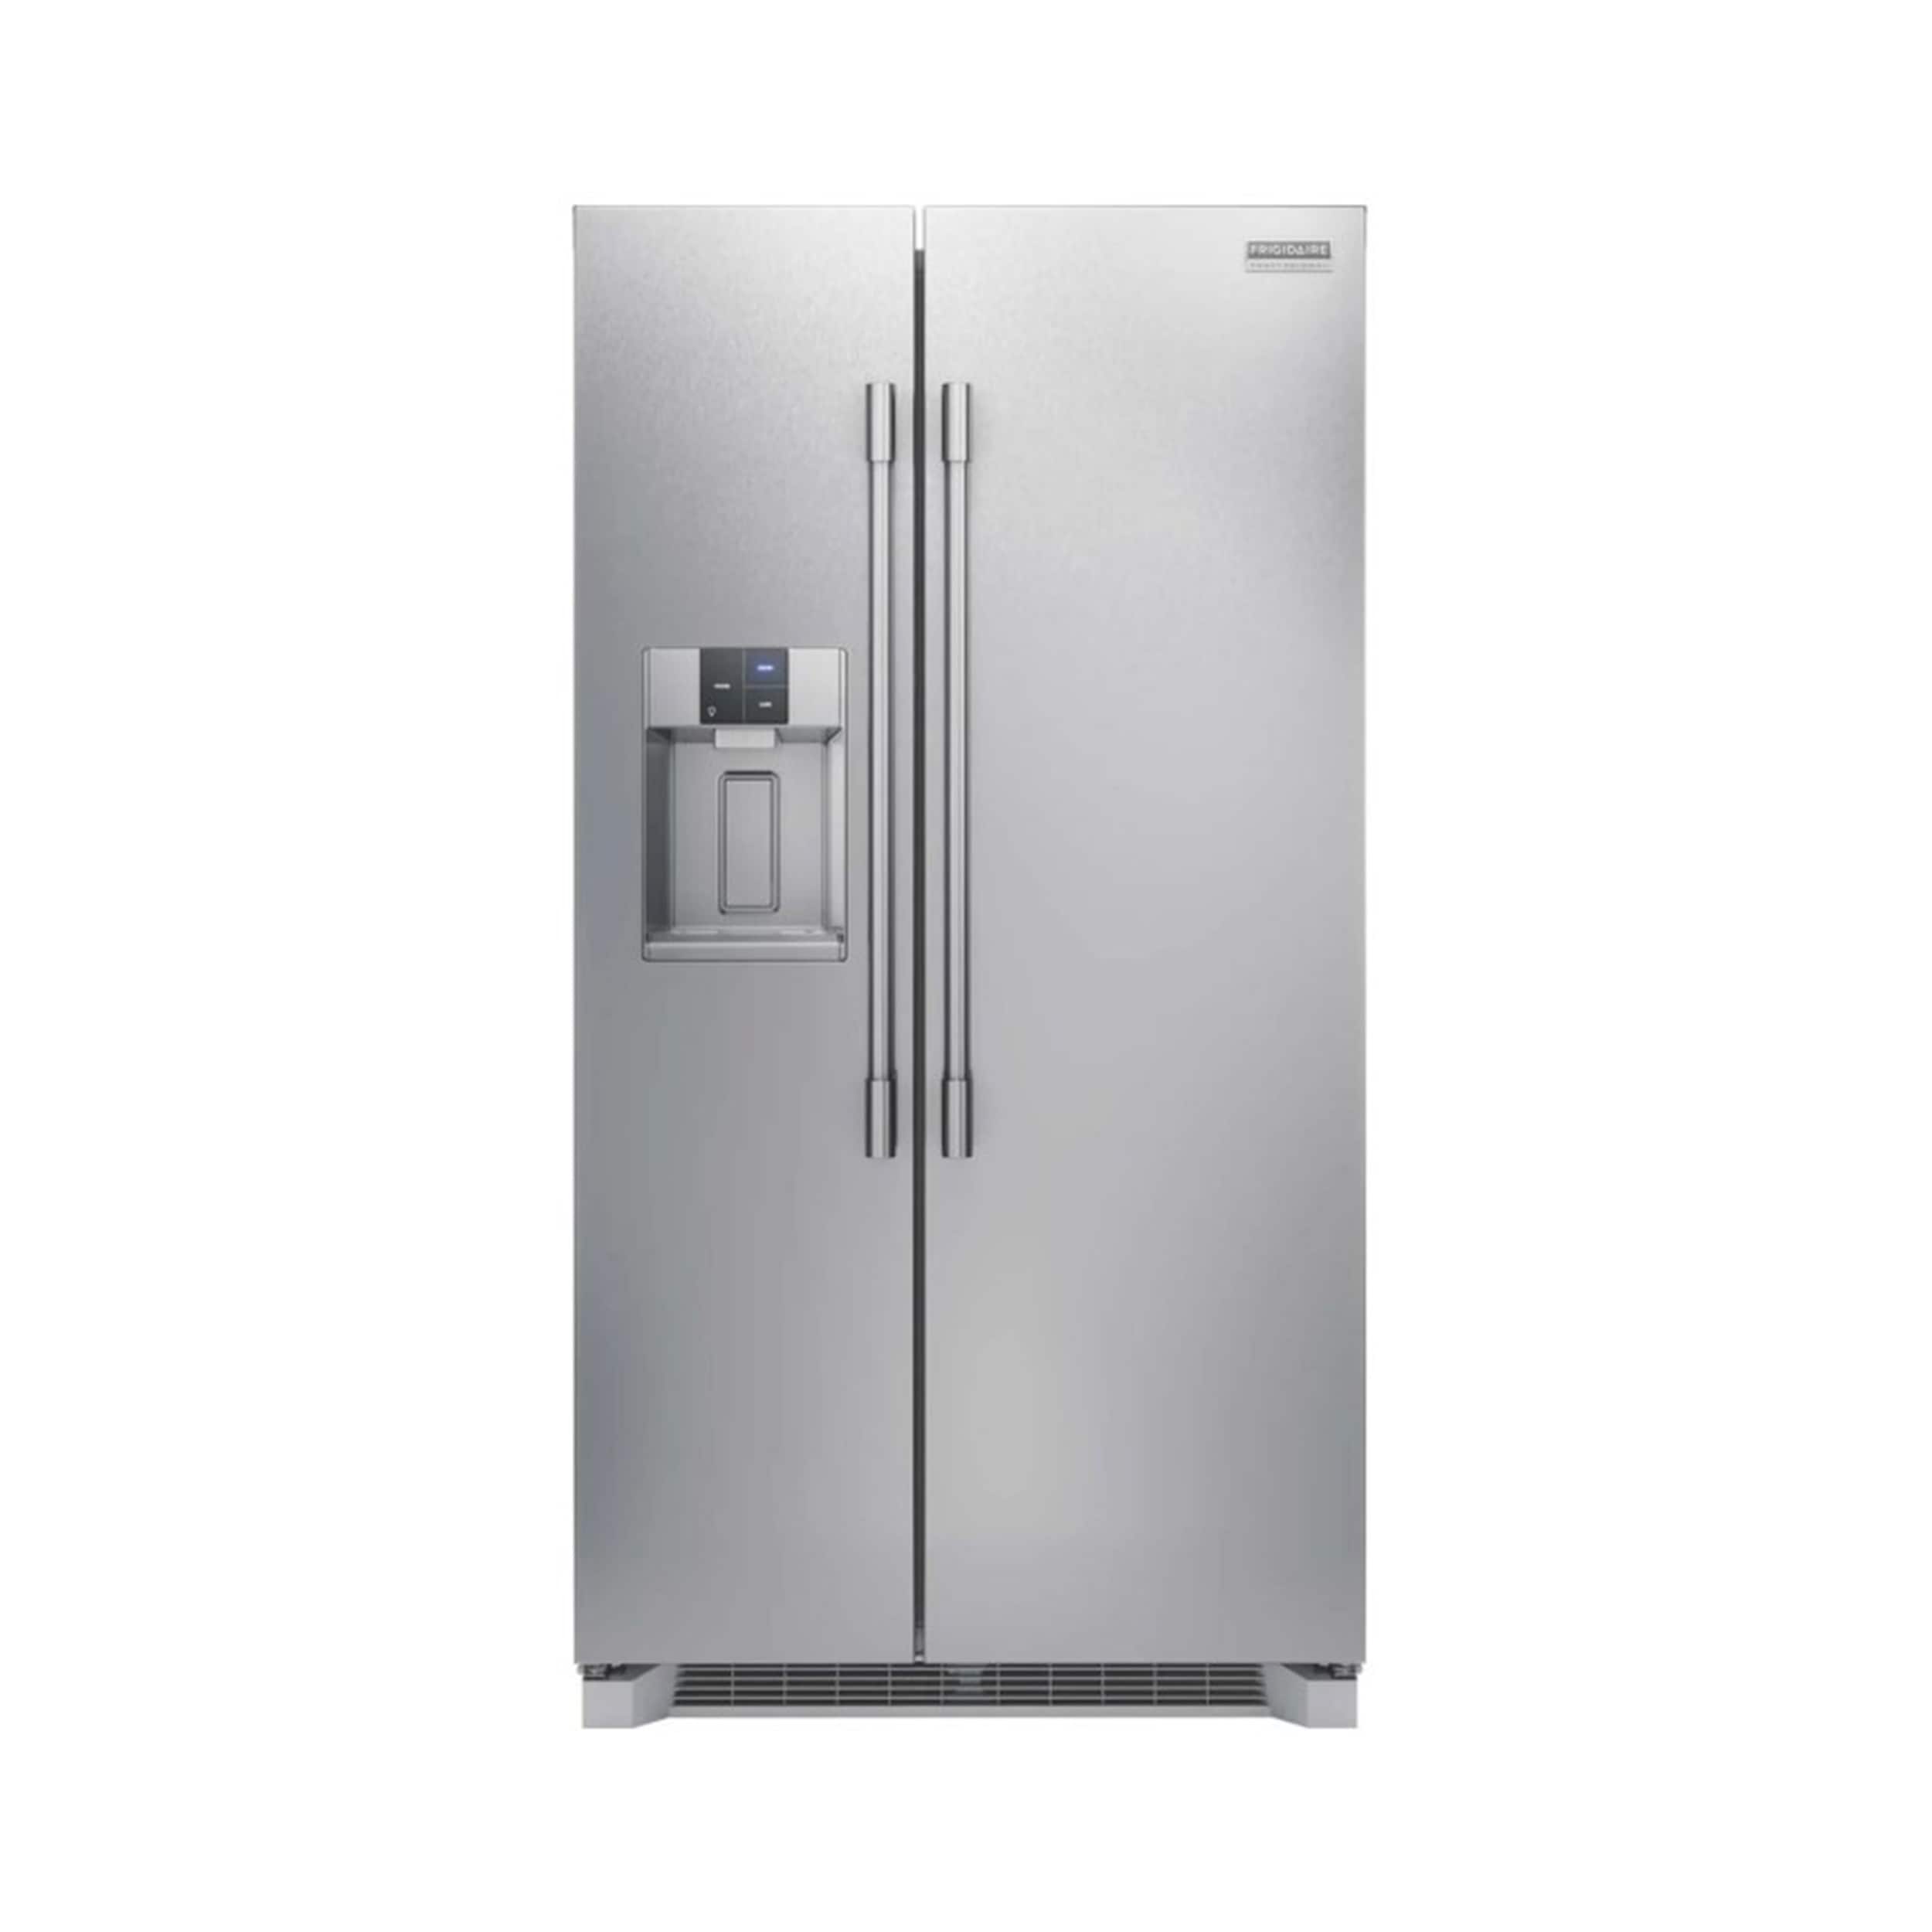 Frigidaire Professional 36 Inch Freestanding Counter Depth Side by Side Refrigerator